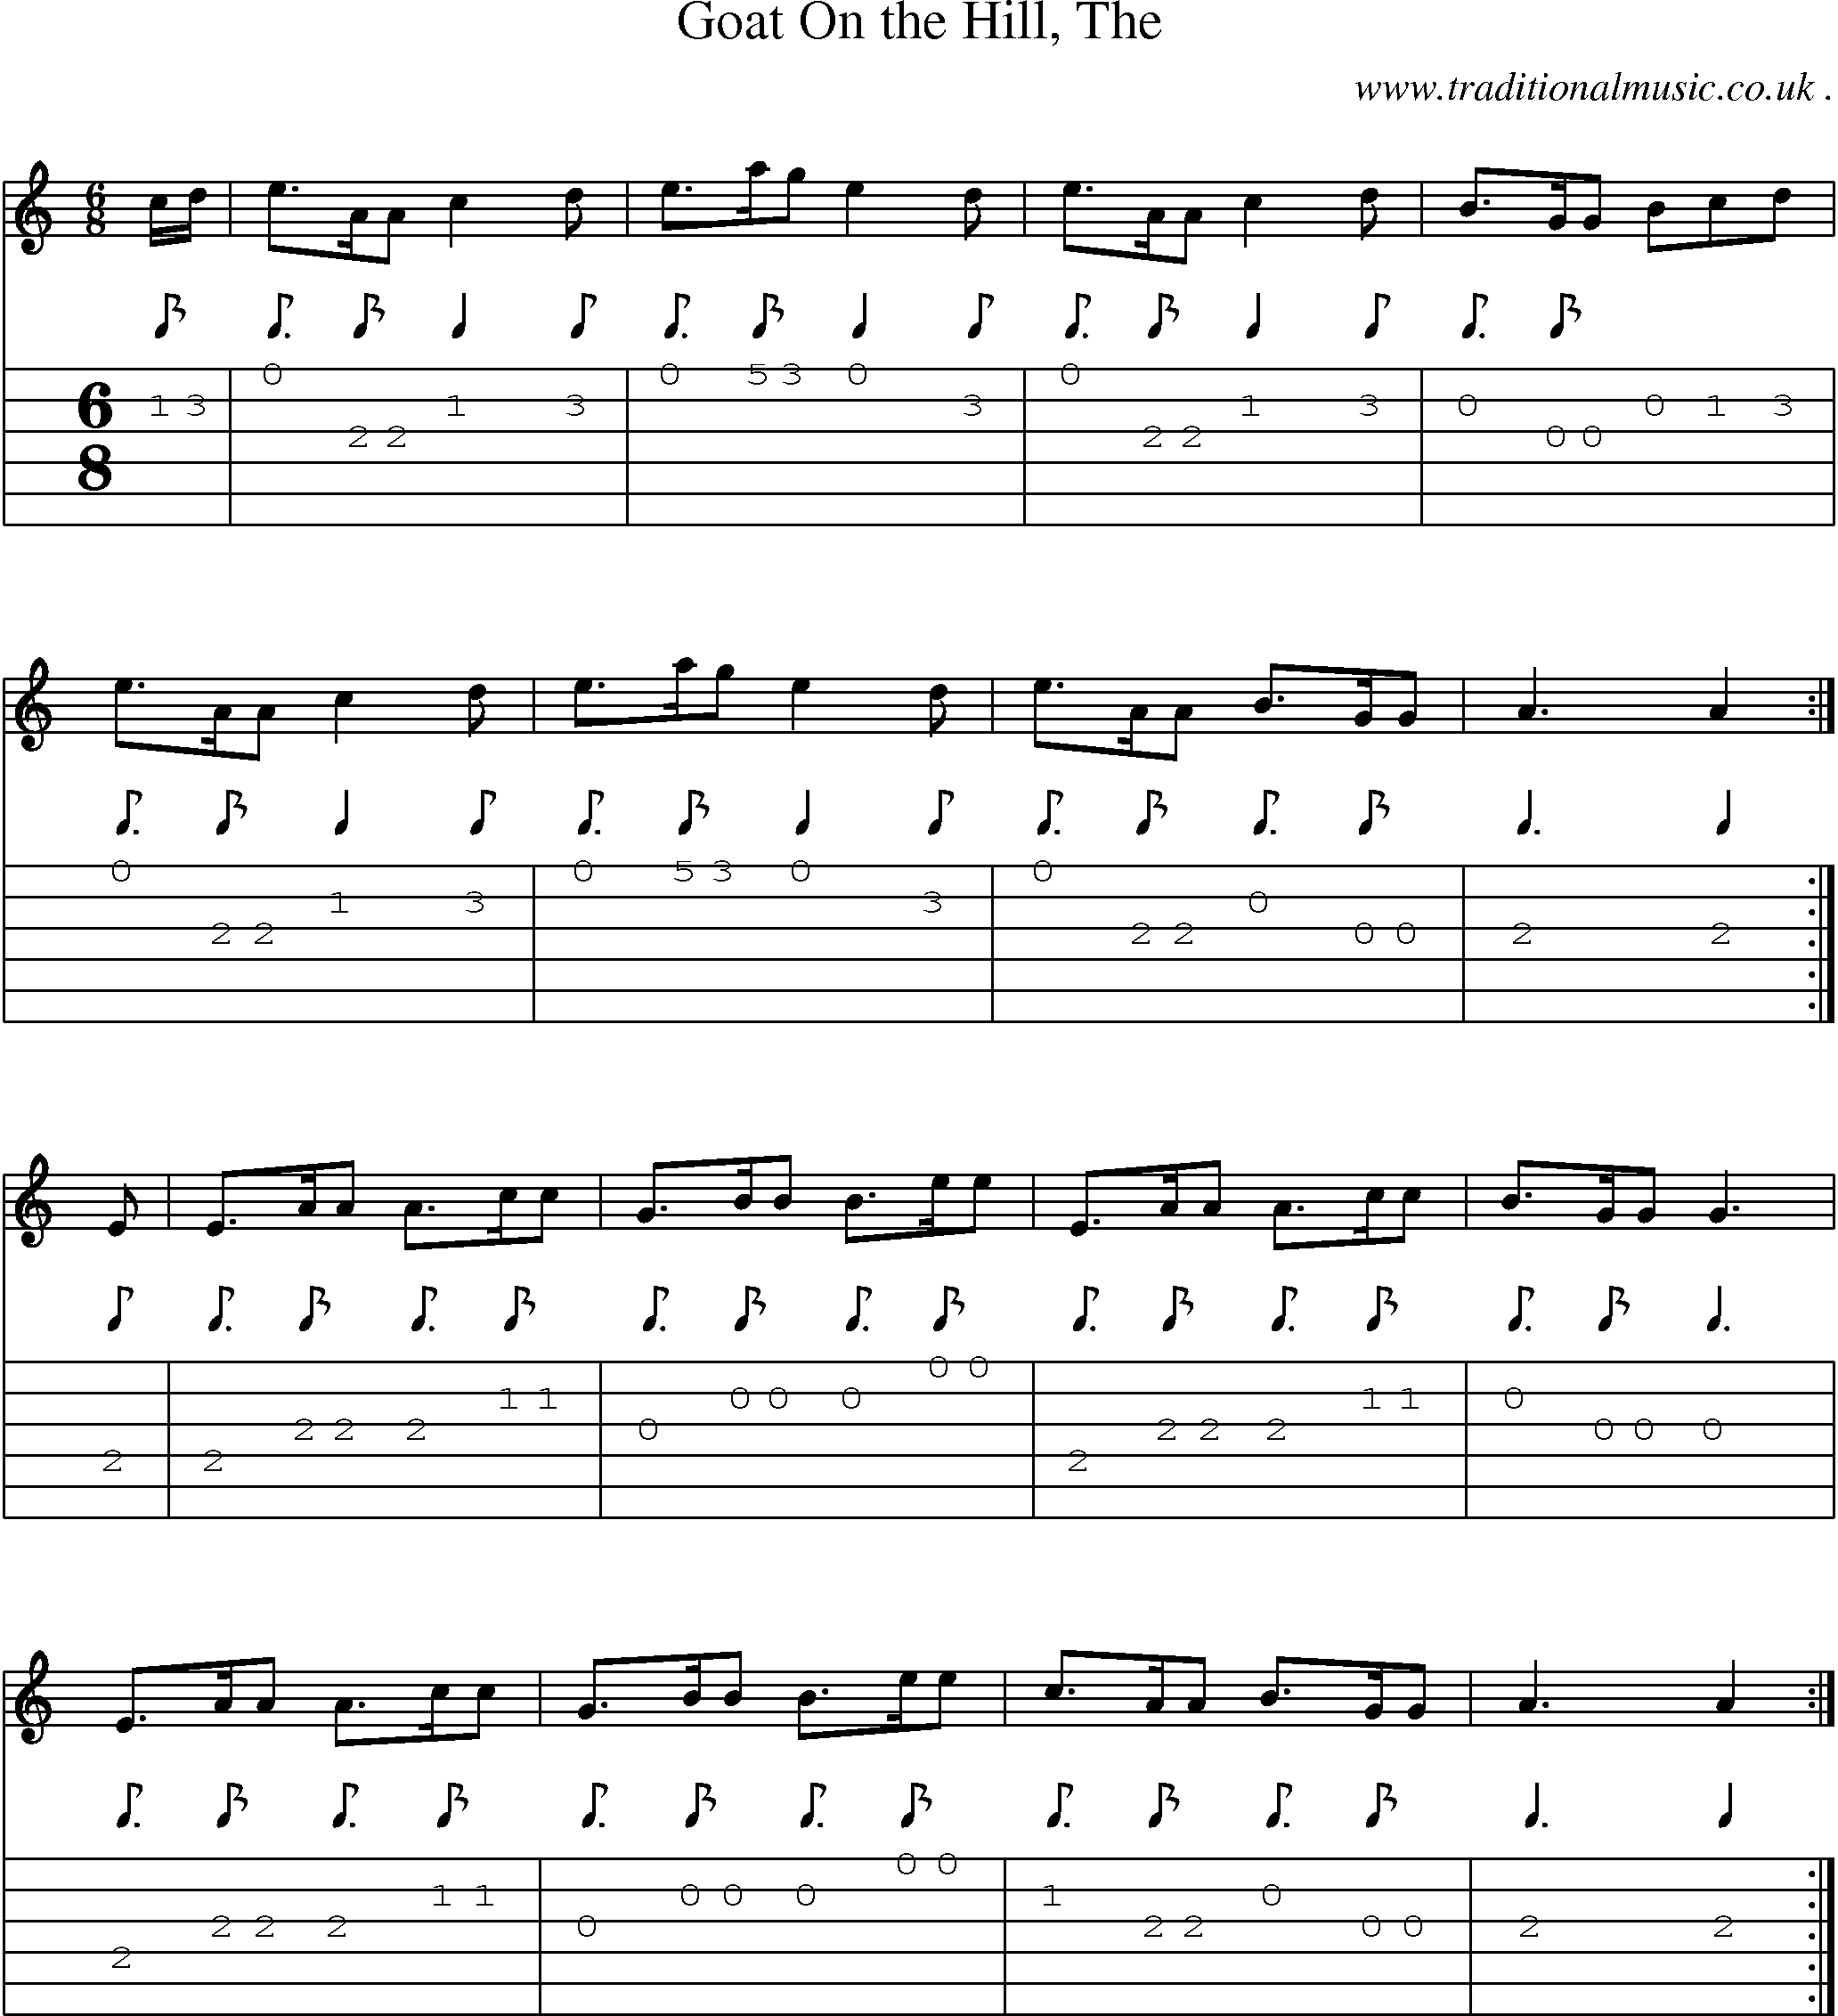 Sheet-music  score, Chords and Guitar Tabs for Goat On The Hill The